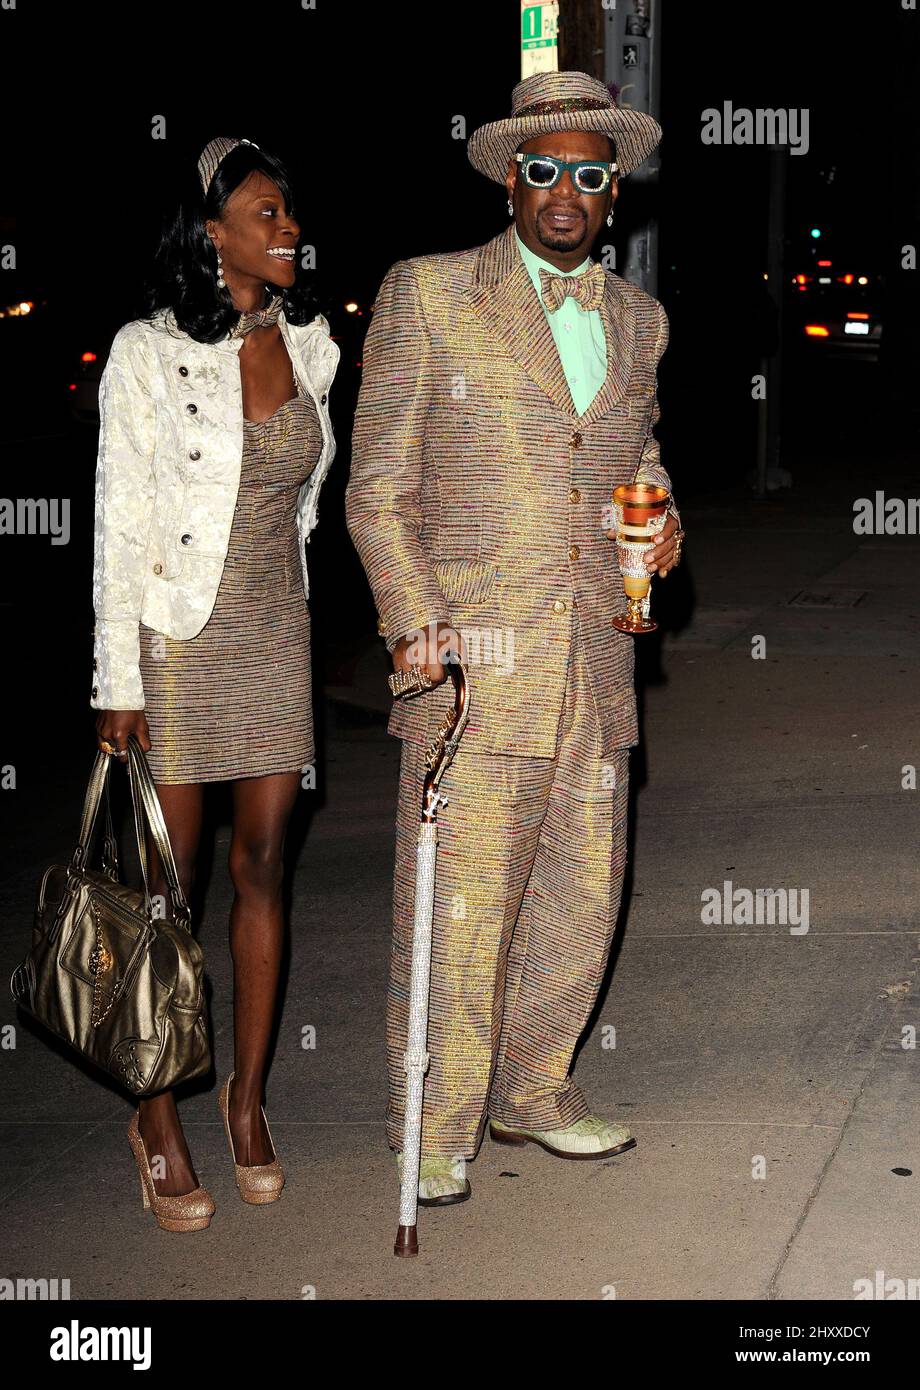 Magic Don Juan at the "Dysfunctional Friends" Los Angeles